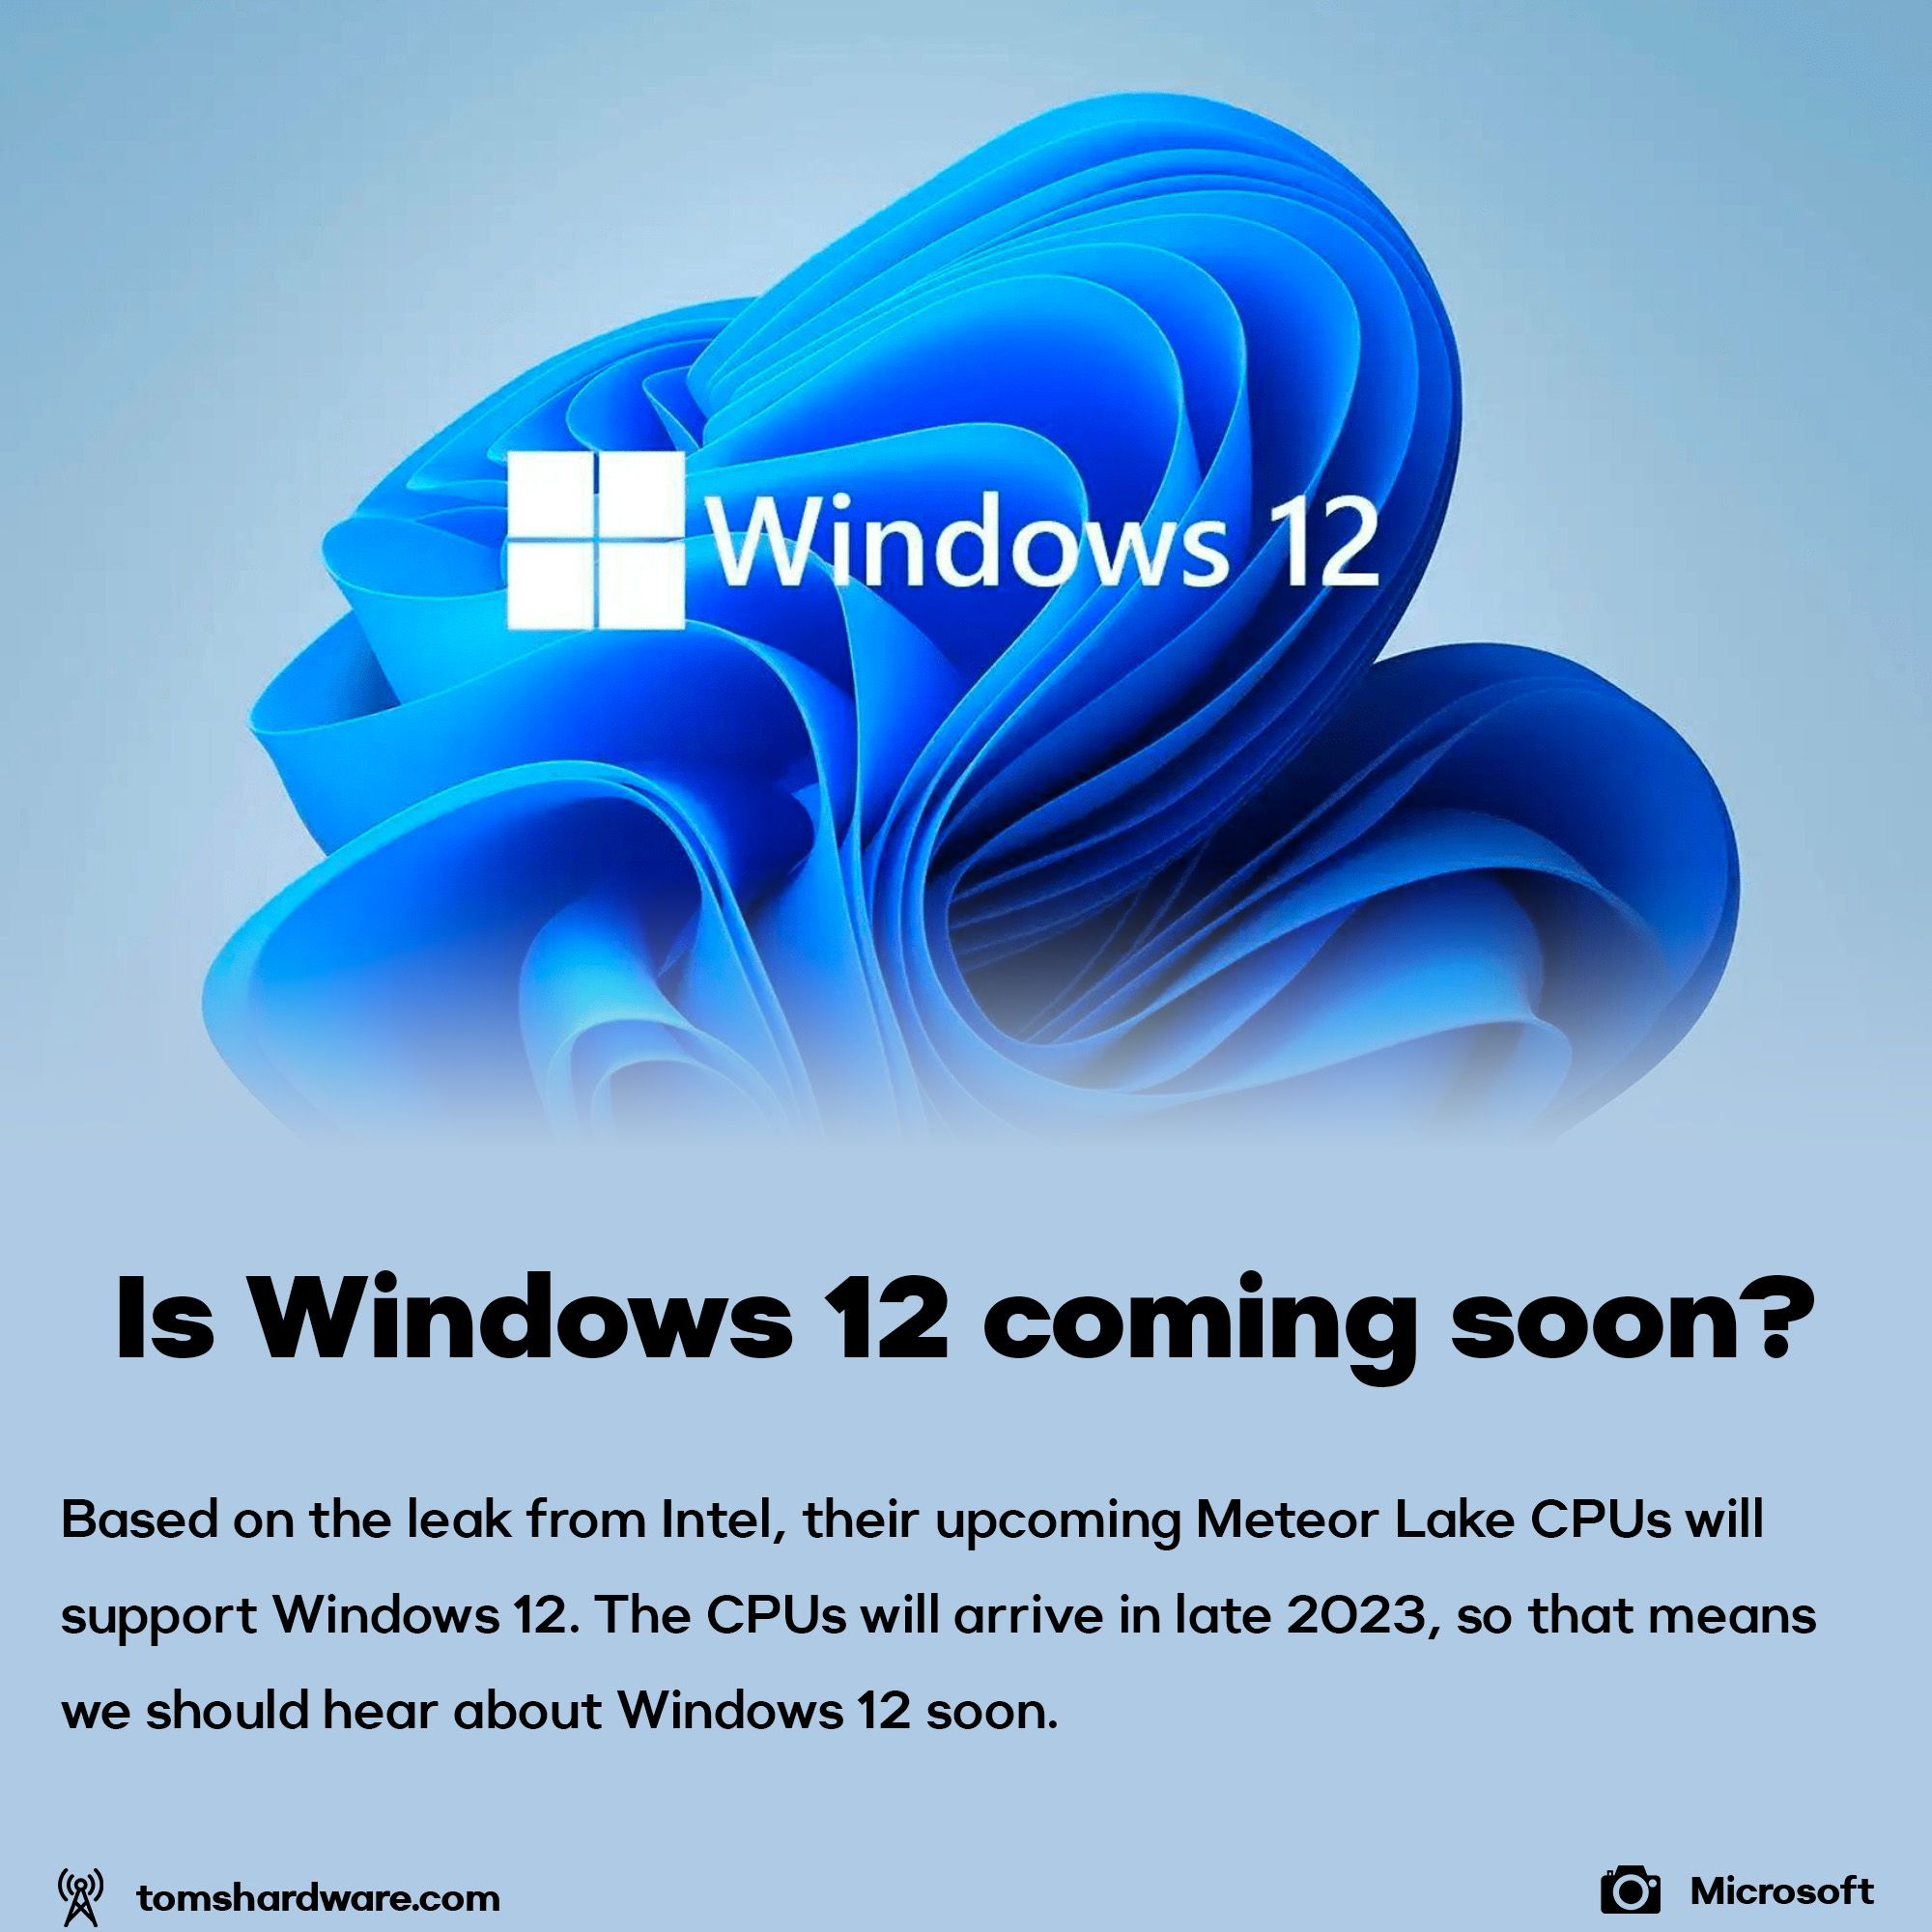 Windows 12 is coming